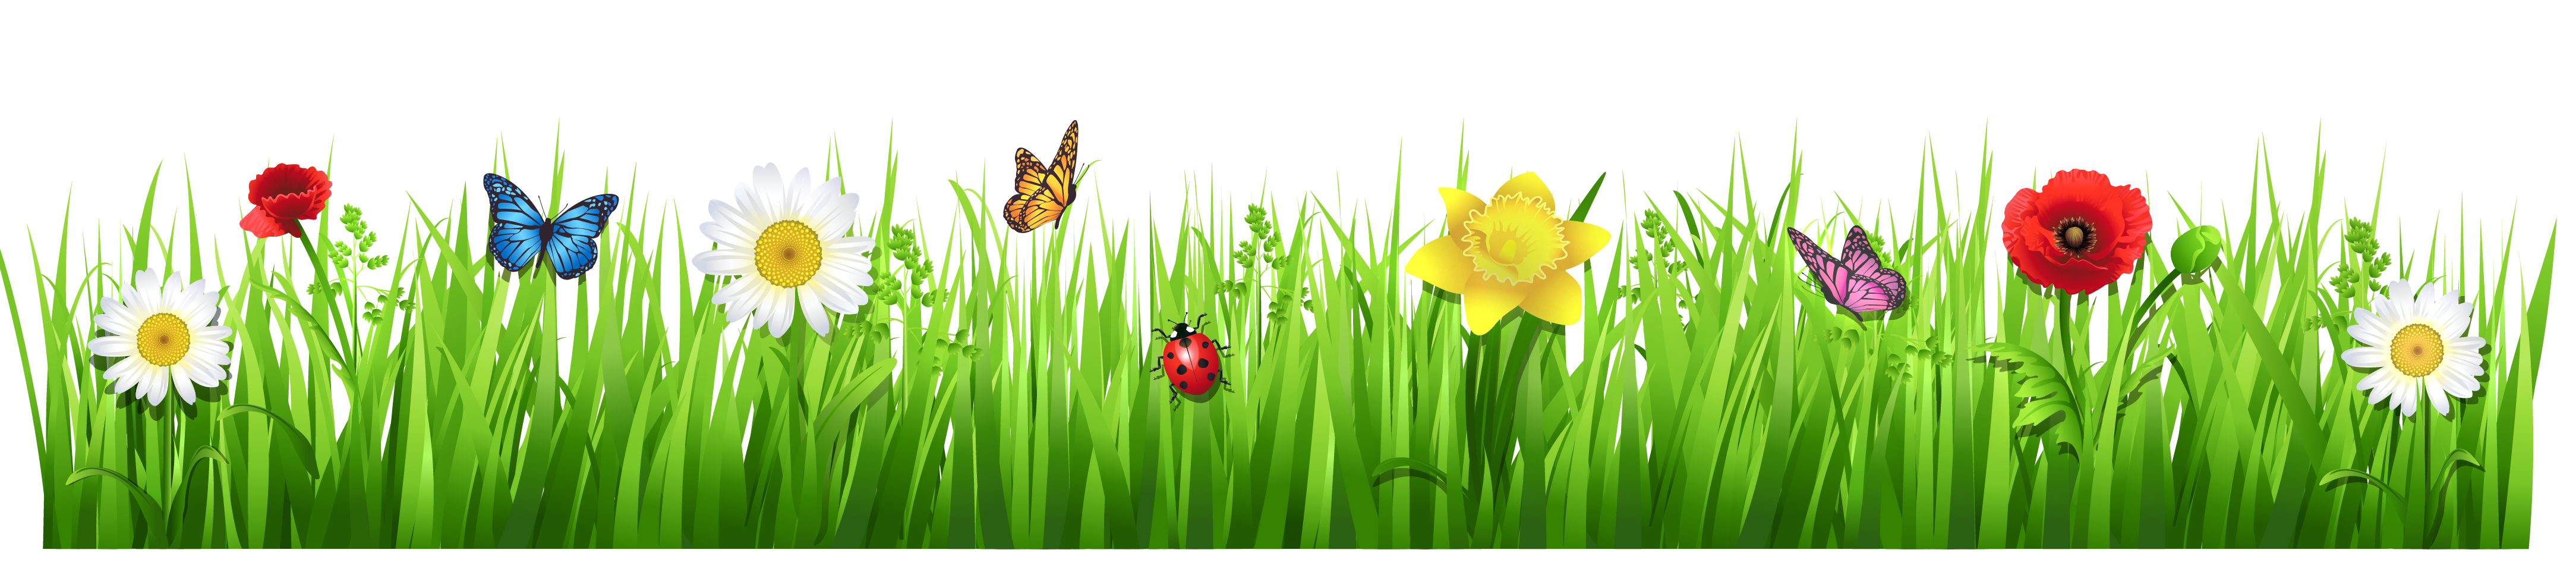 spring flower clipart images - photo #42